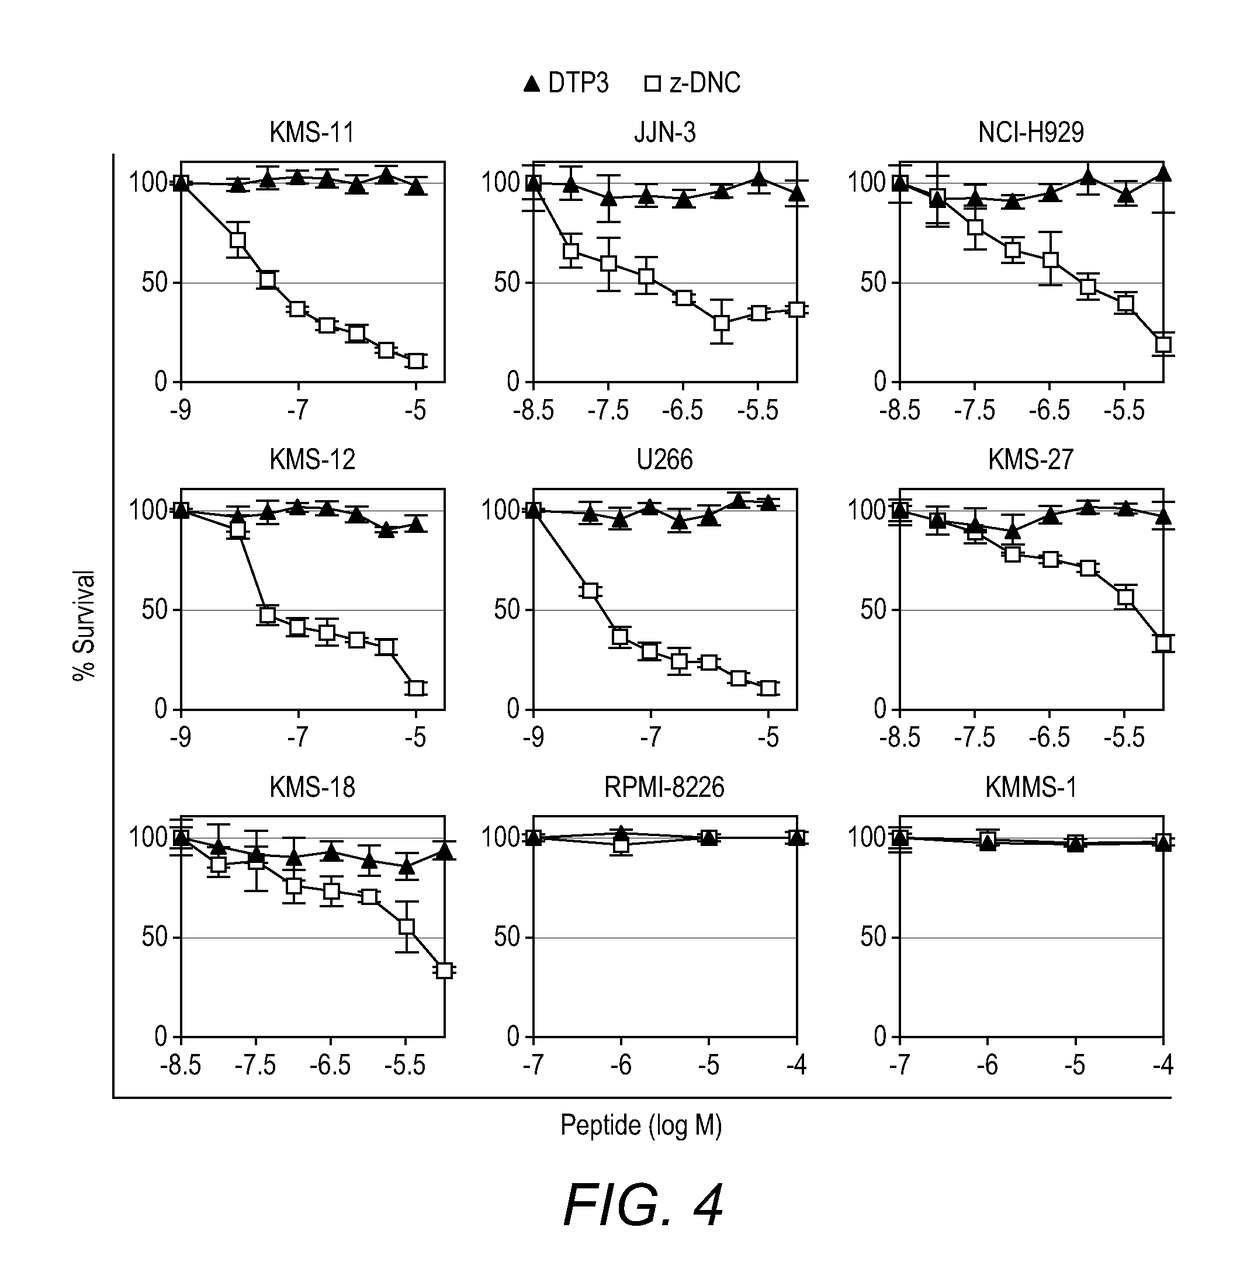 Gadd45beta/mkk7 inhibitor for the treatment of a resistant haematological malignancy